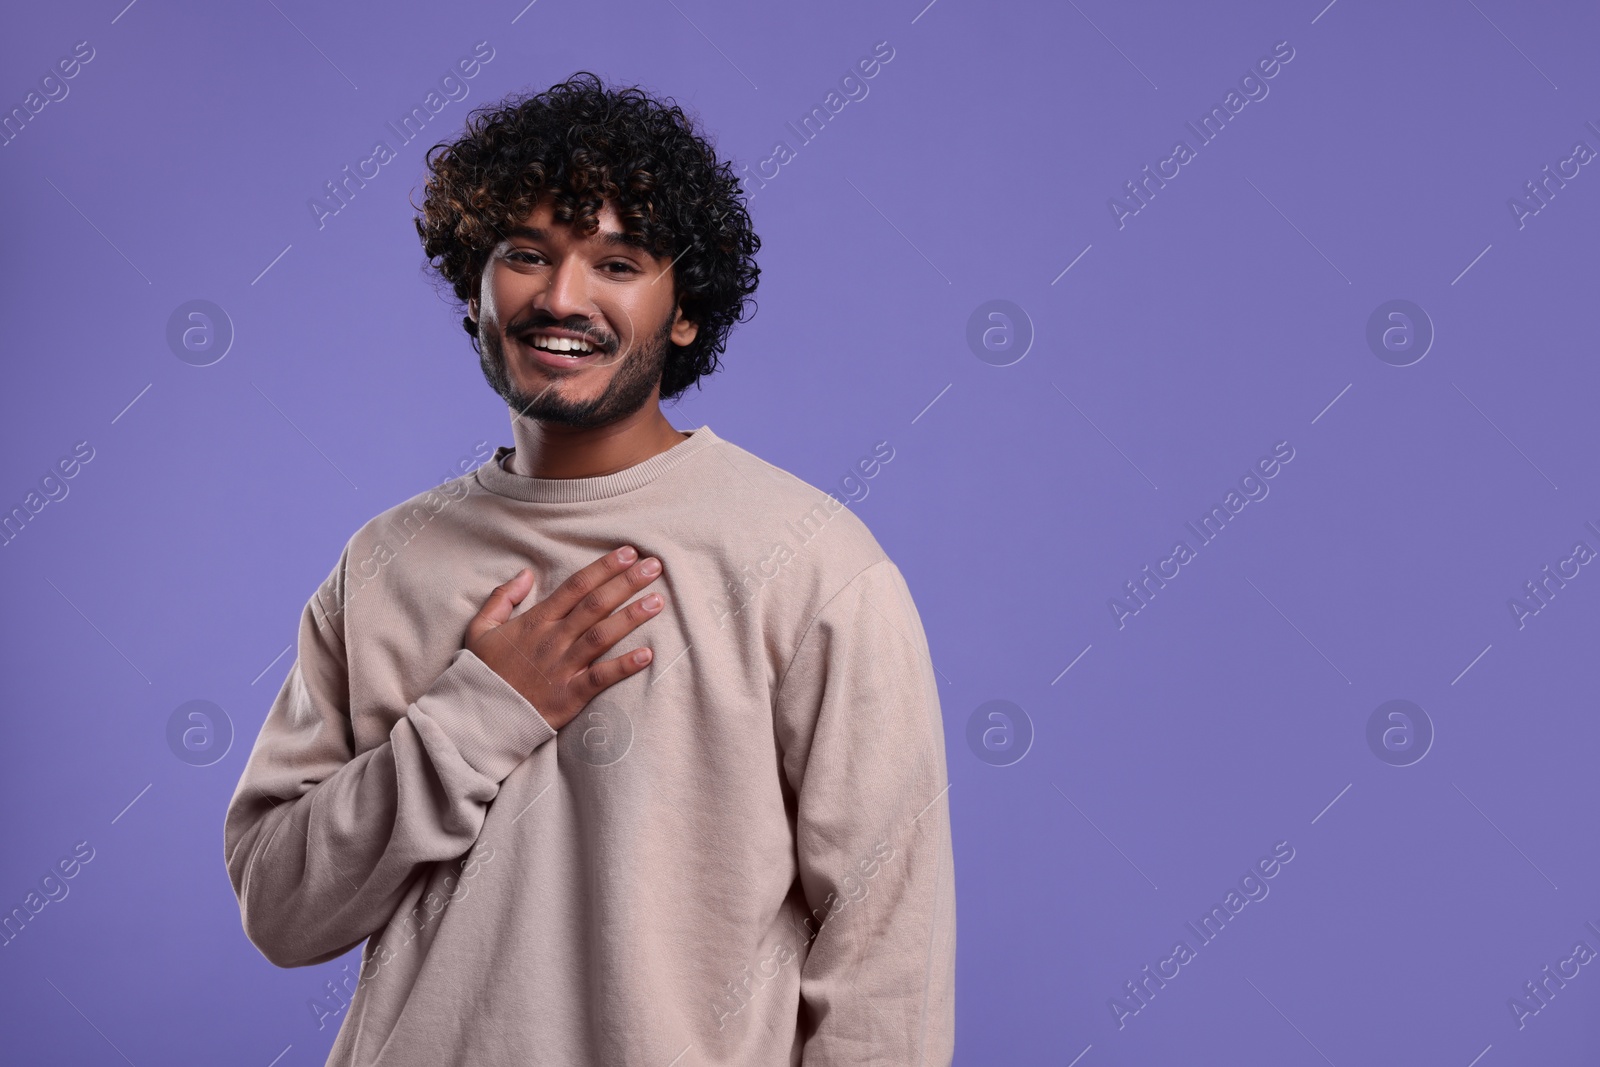 Photo of Handsome smiling man on violet background, space for text